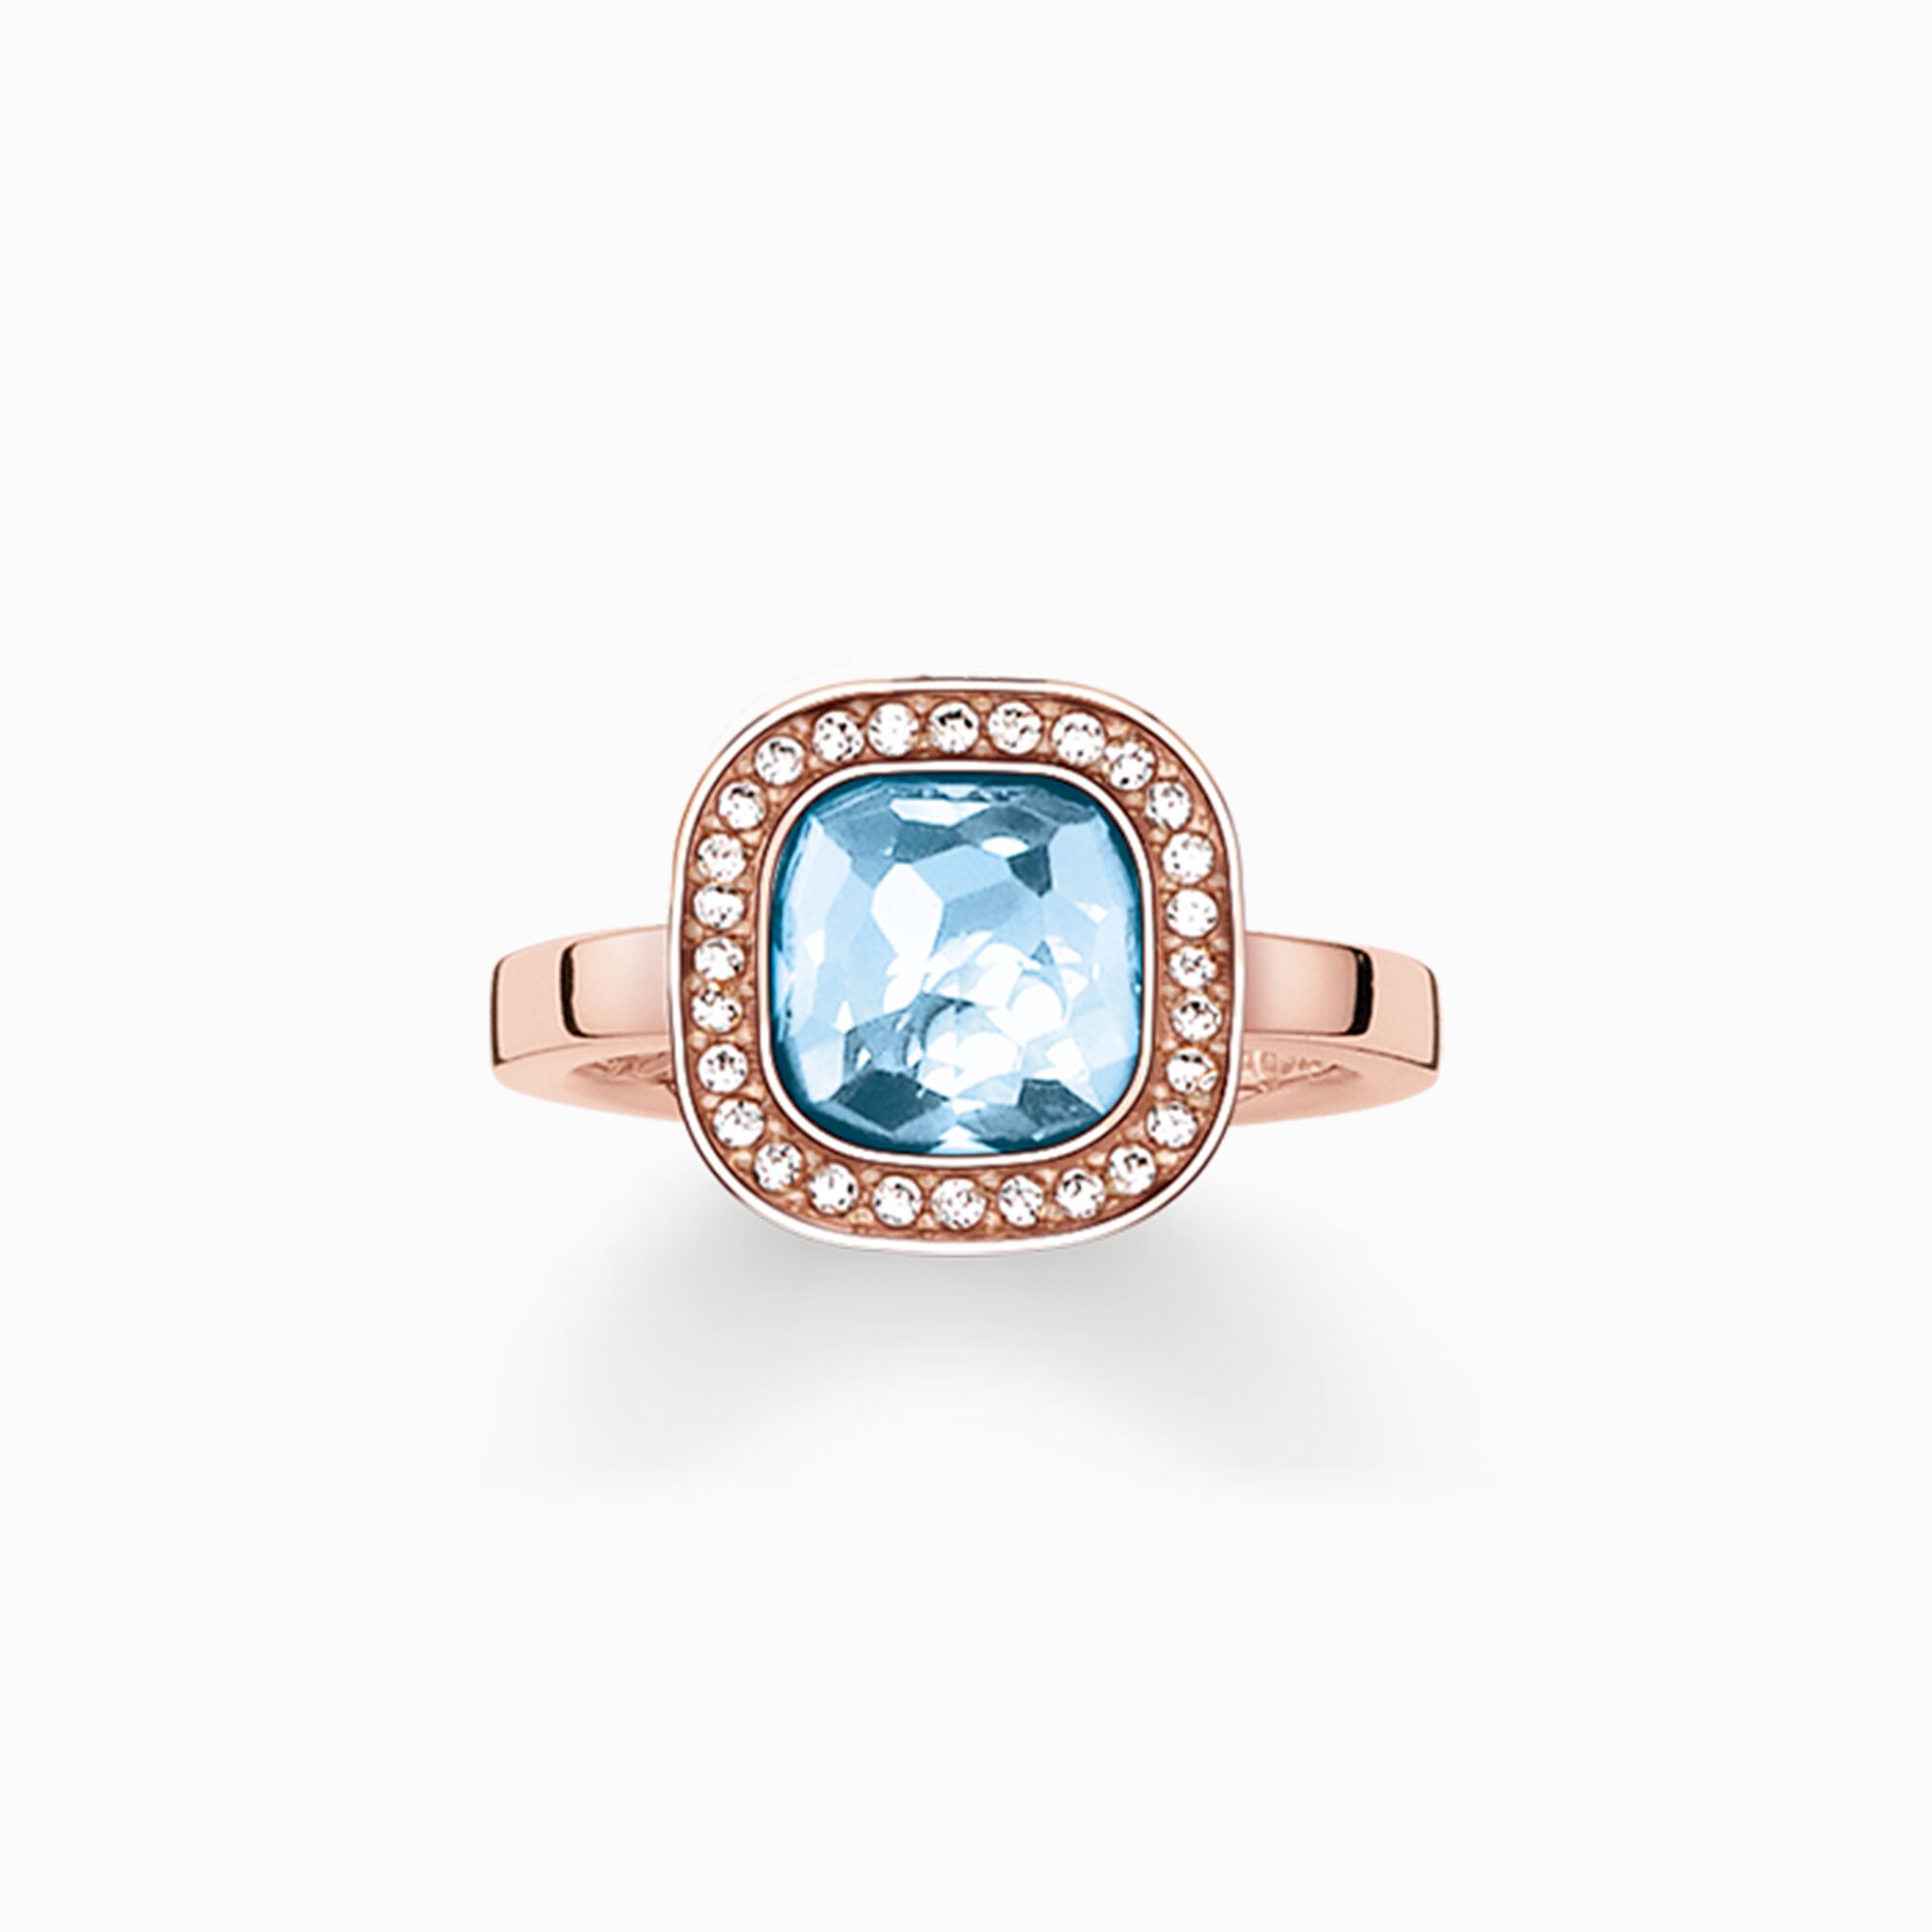 Solitaire ring light blue cosmos from the  collection in the THOMAS SABO online store